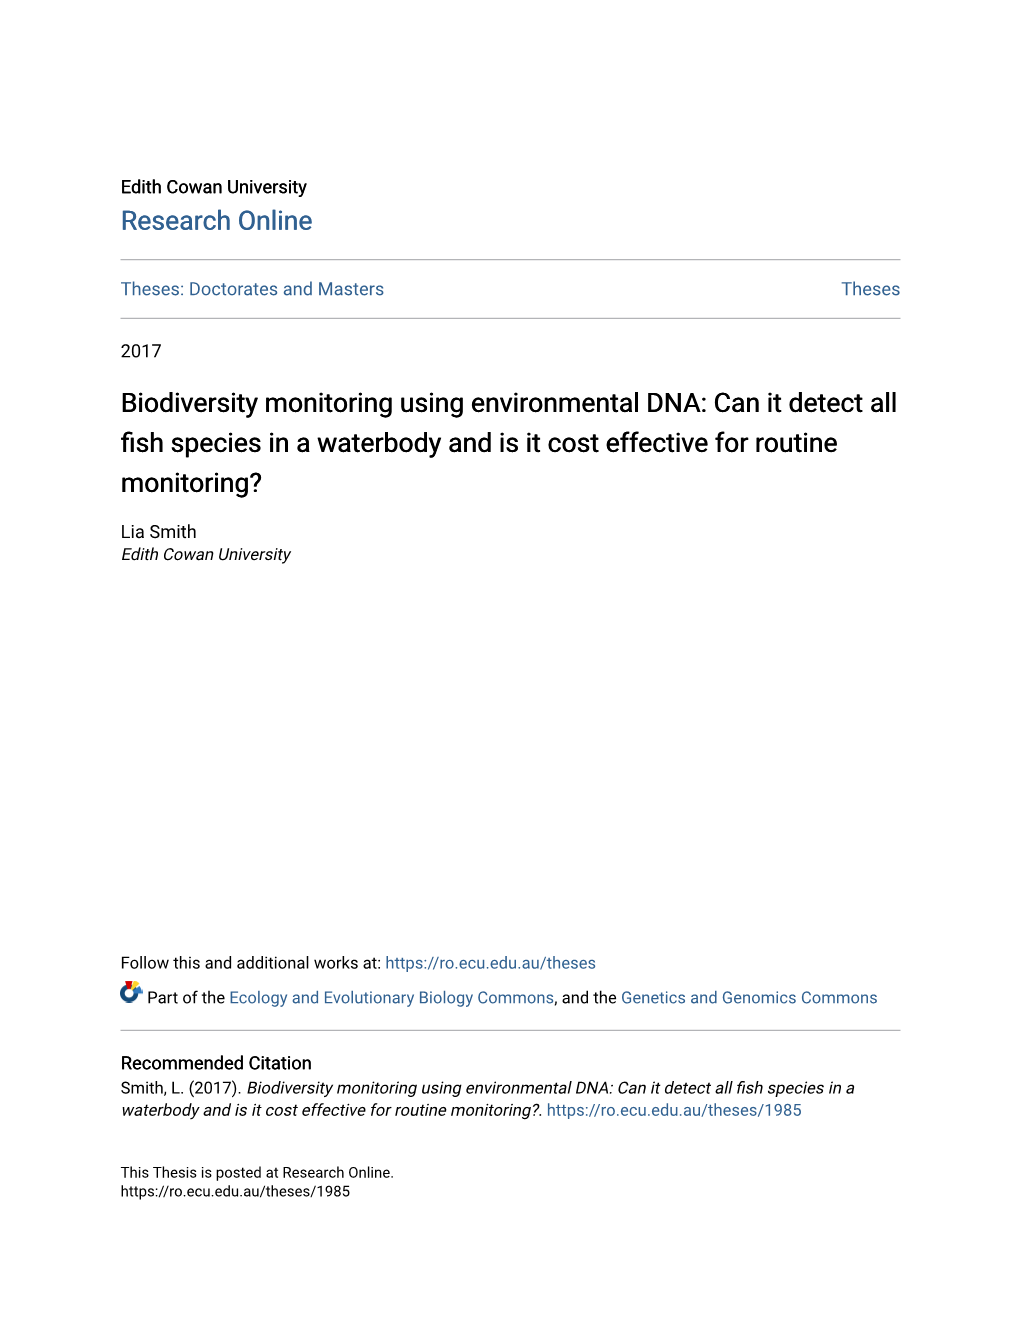 Biodiversity Monitoring Using Environmental DNA: Can It Detect All Fish Species in a Waterbody and Is It Cost Effective for Routine Monitoring?